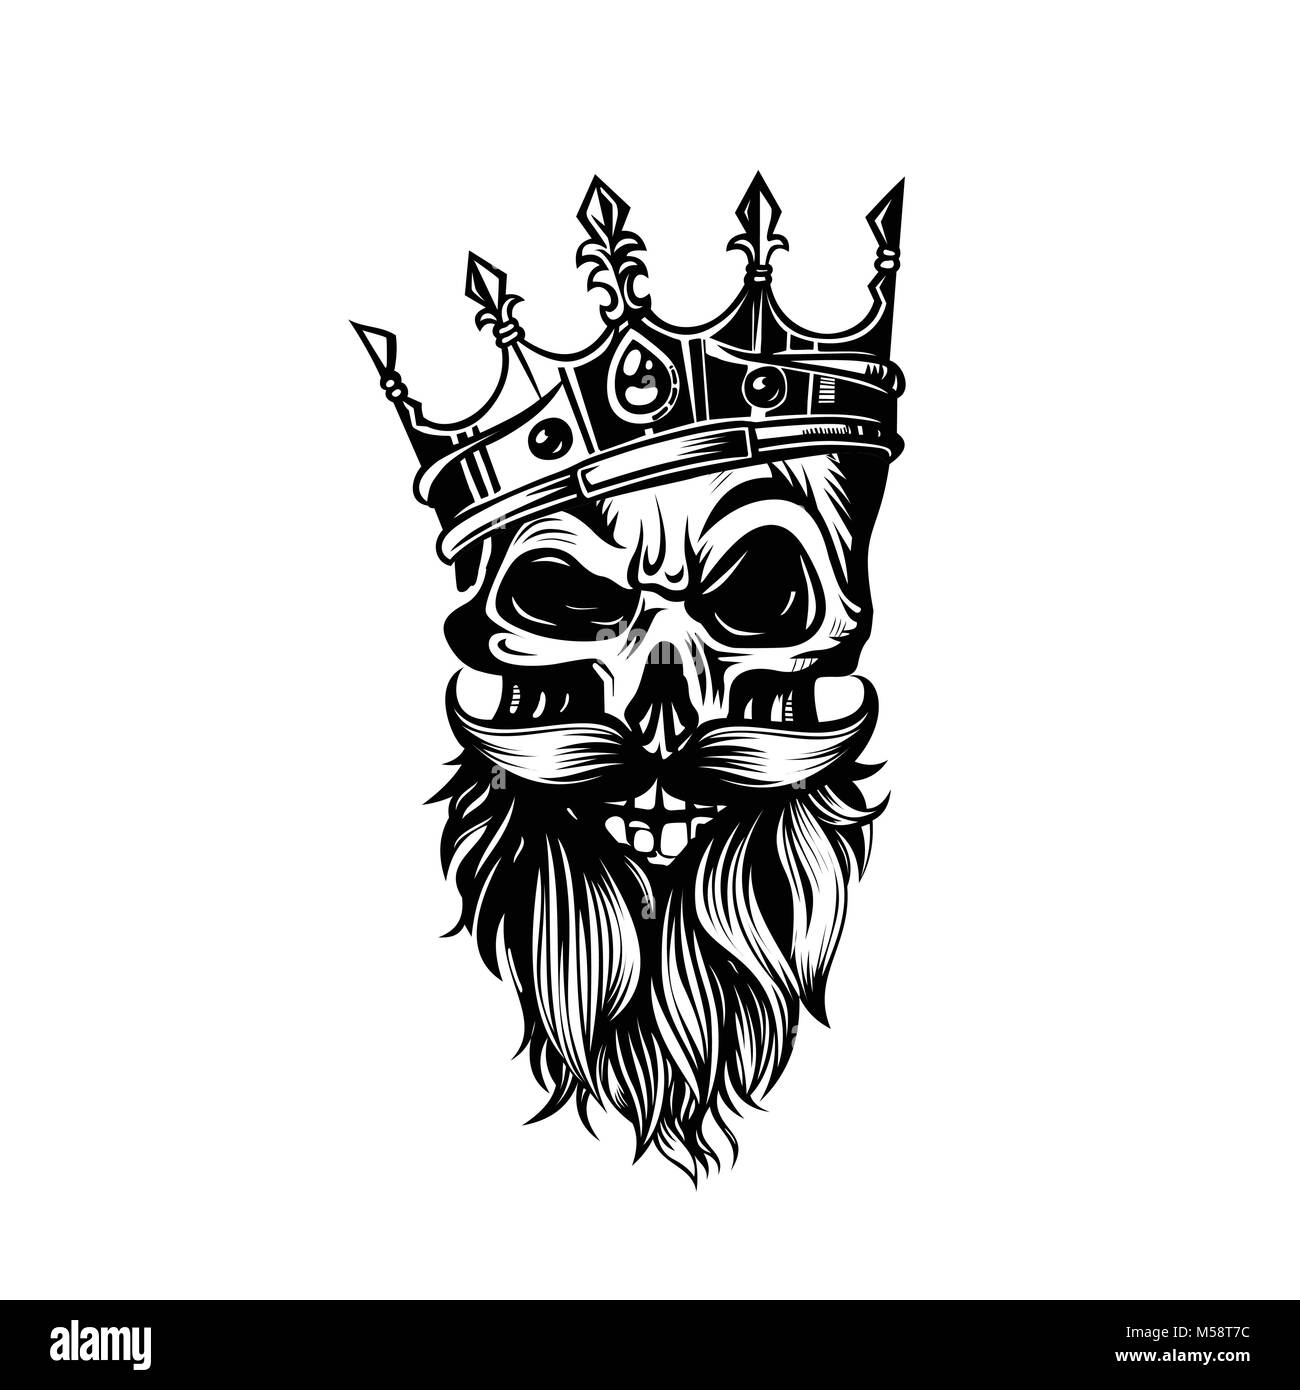 black and white skull in crown with beard vector illustration. Stock Vector